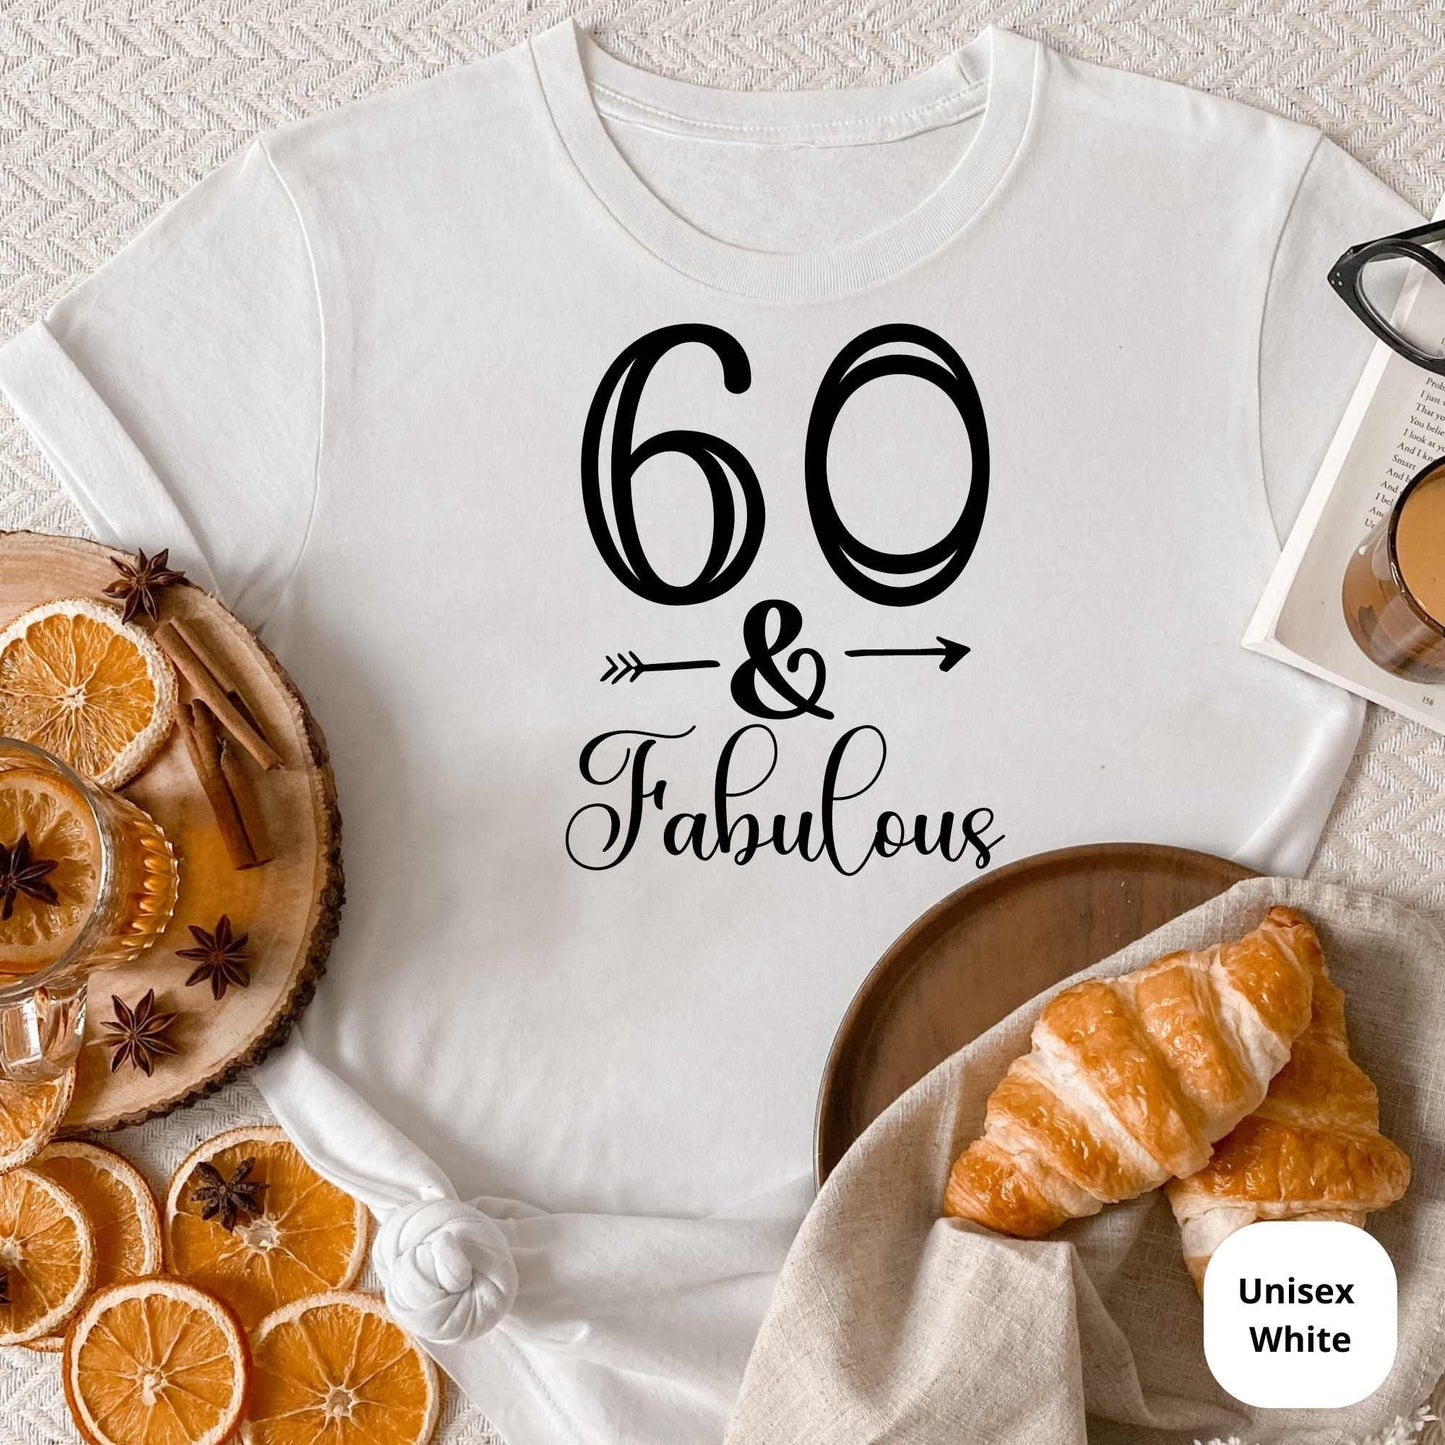 60th Birthday Shirt, 60th Birthday Gifts, Fabulous 60 Tee, Great Gift for Grandma, Mom, Aunties, Cousins & Loved Ones Bday Party Celebration HMDesignStudioUS